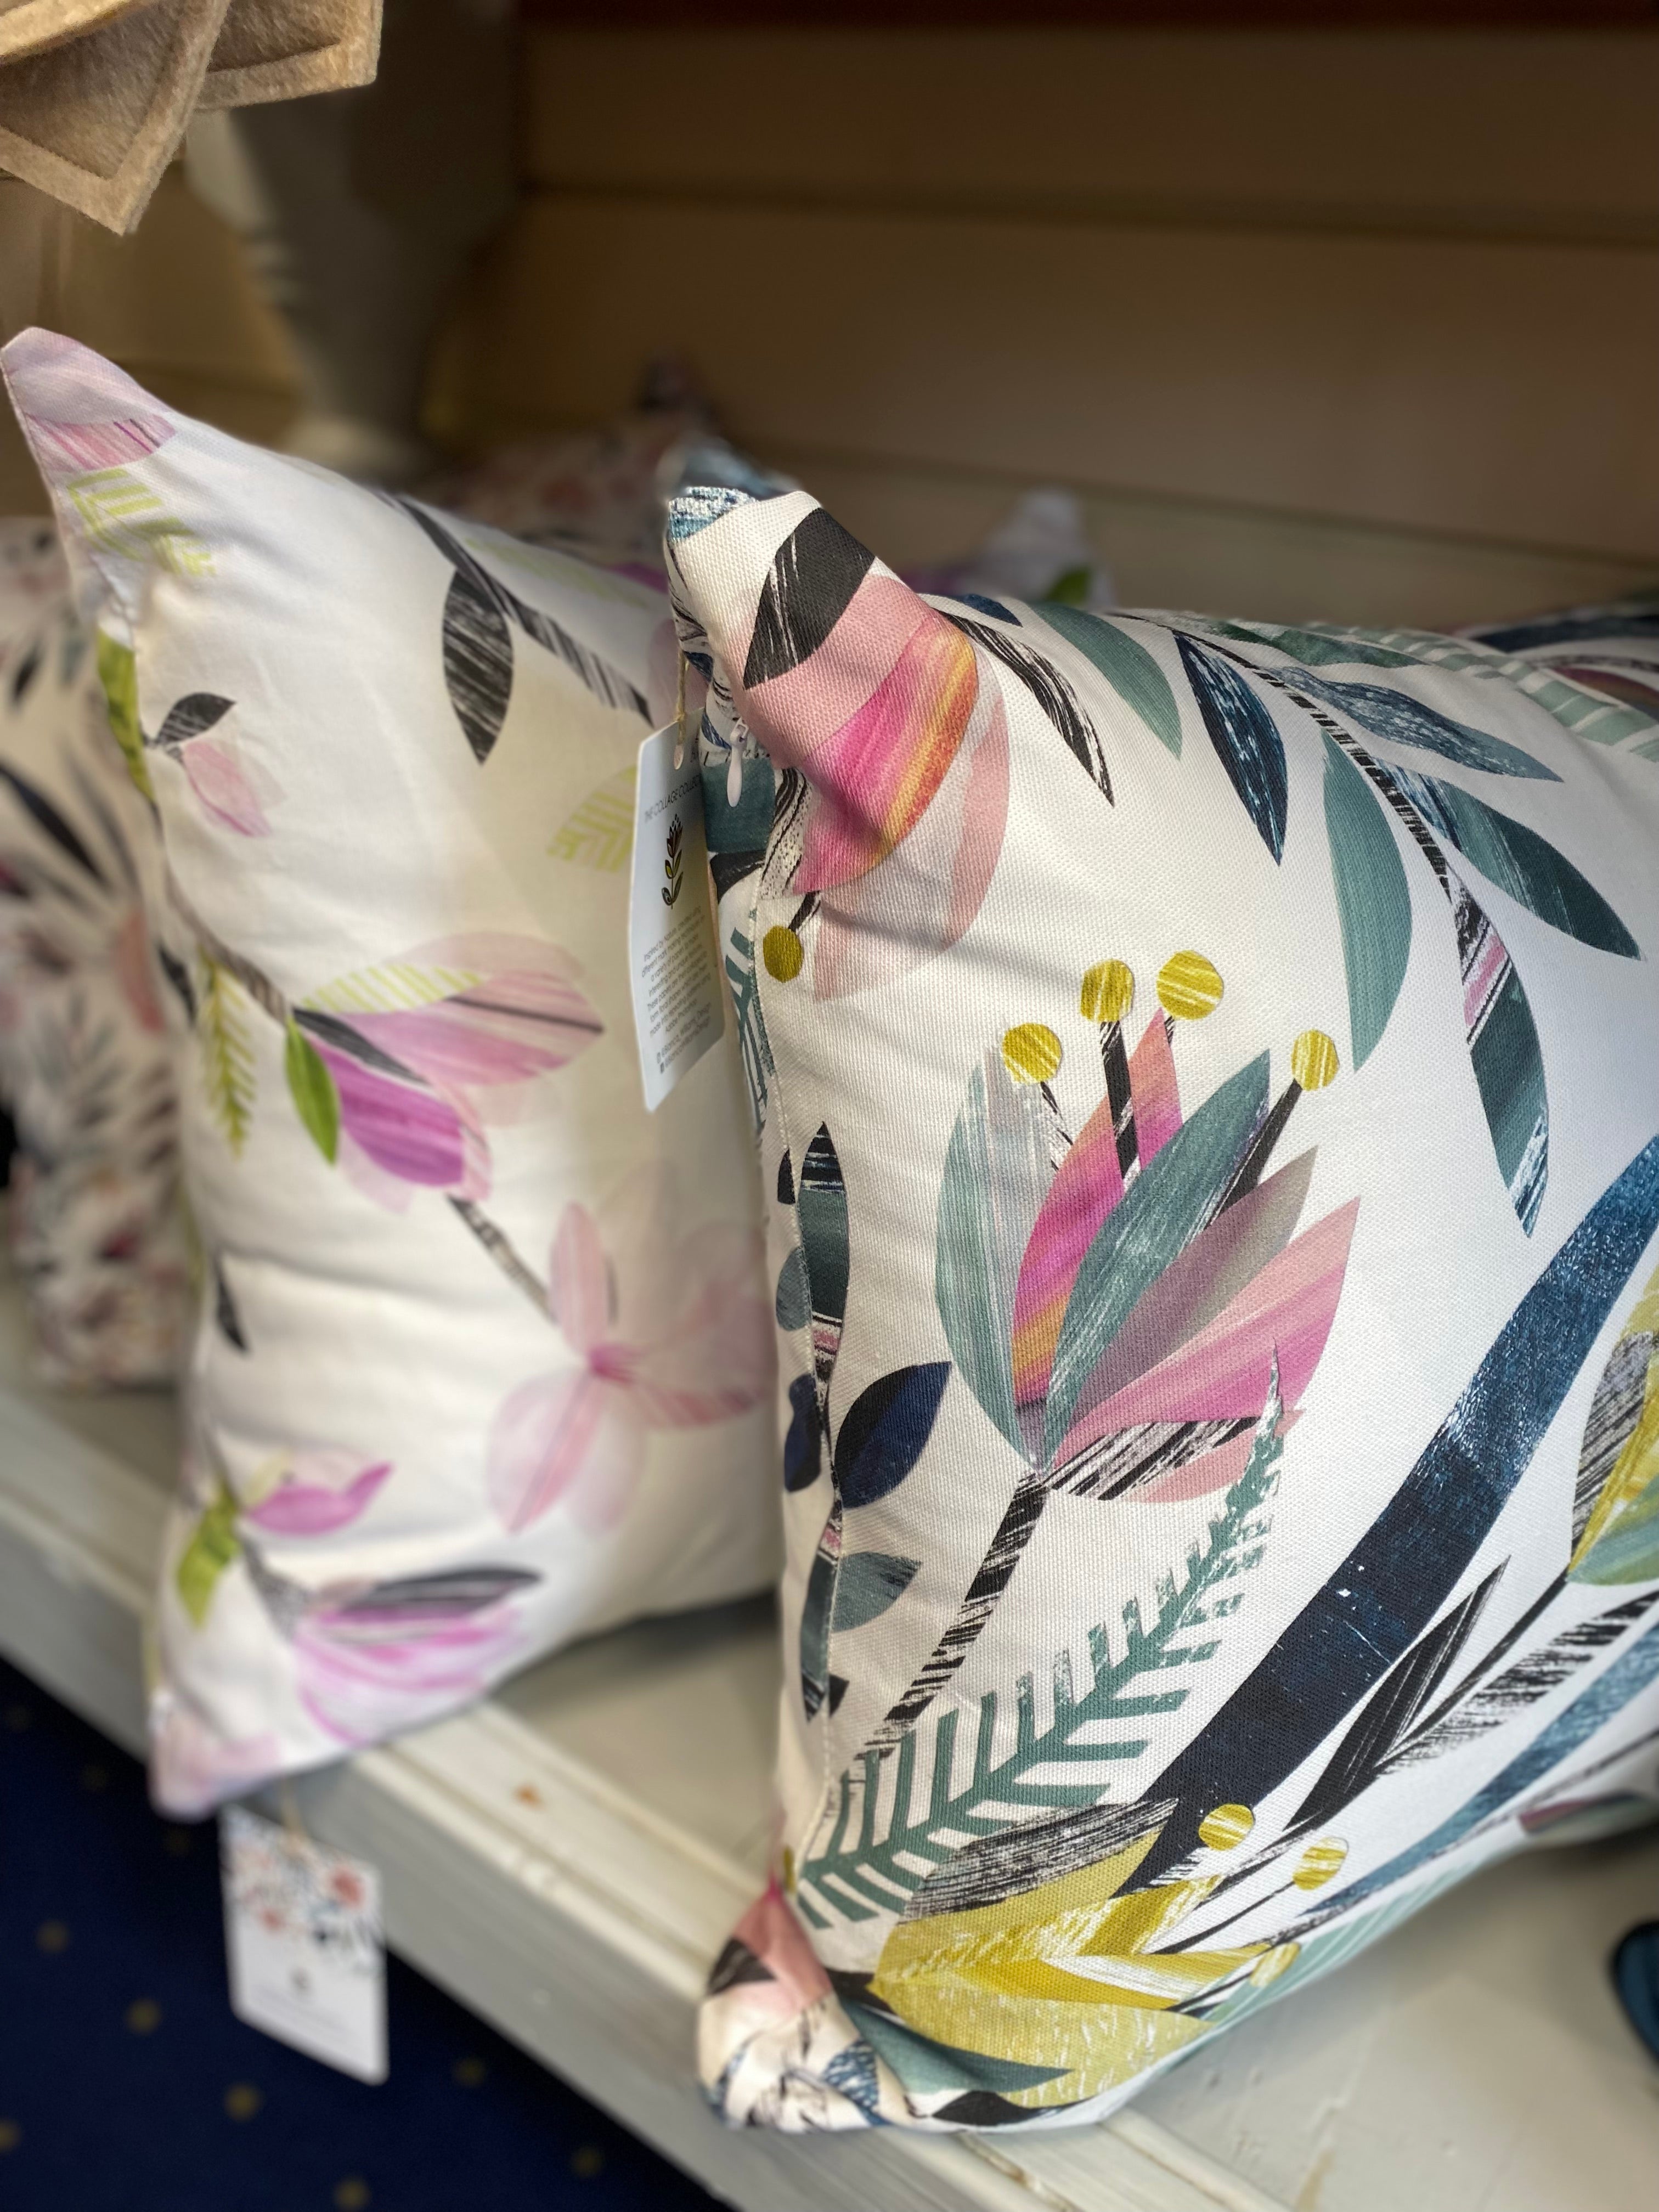 Tulip and Magnolia Cushions placed side by side on a shelf.